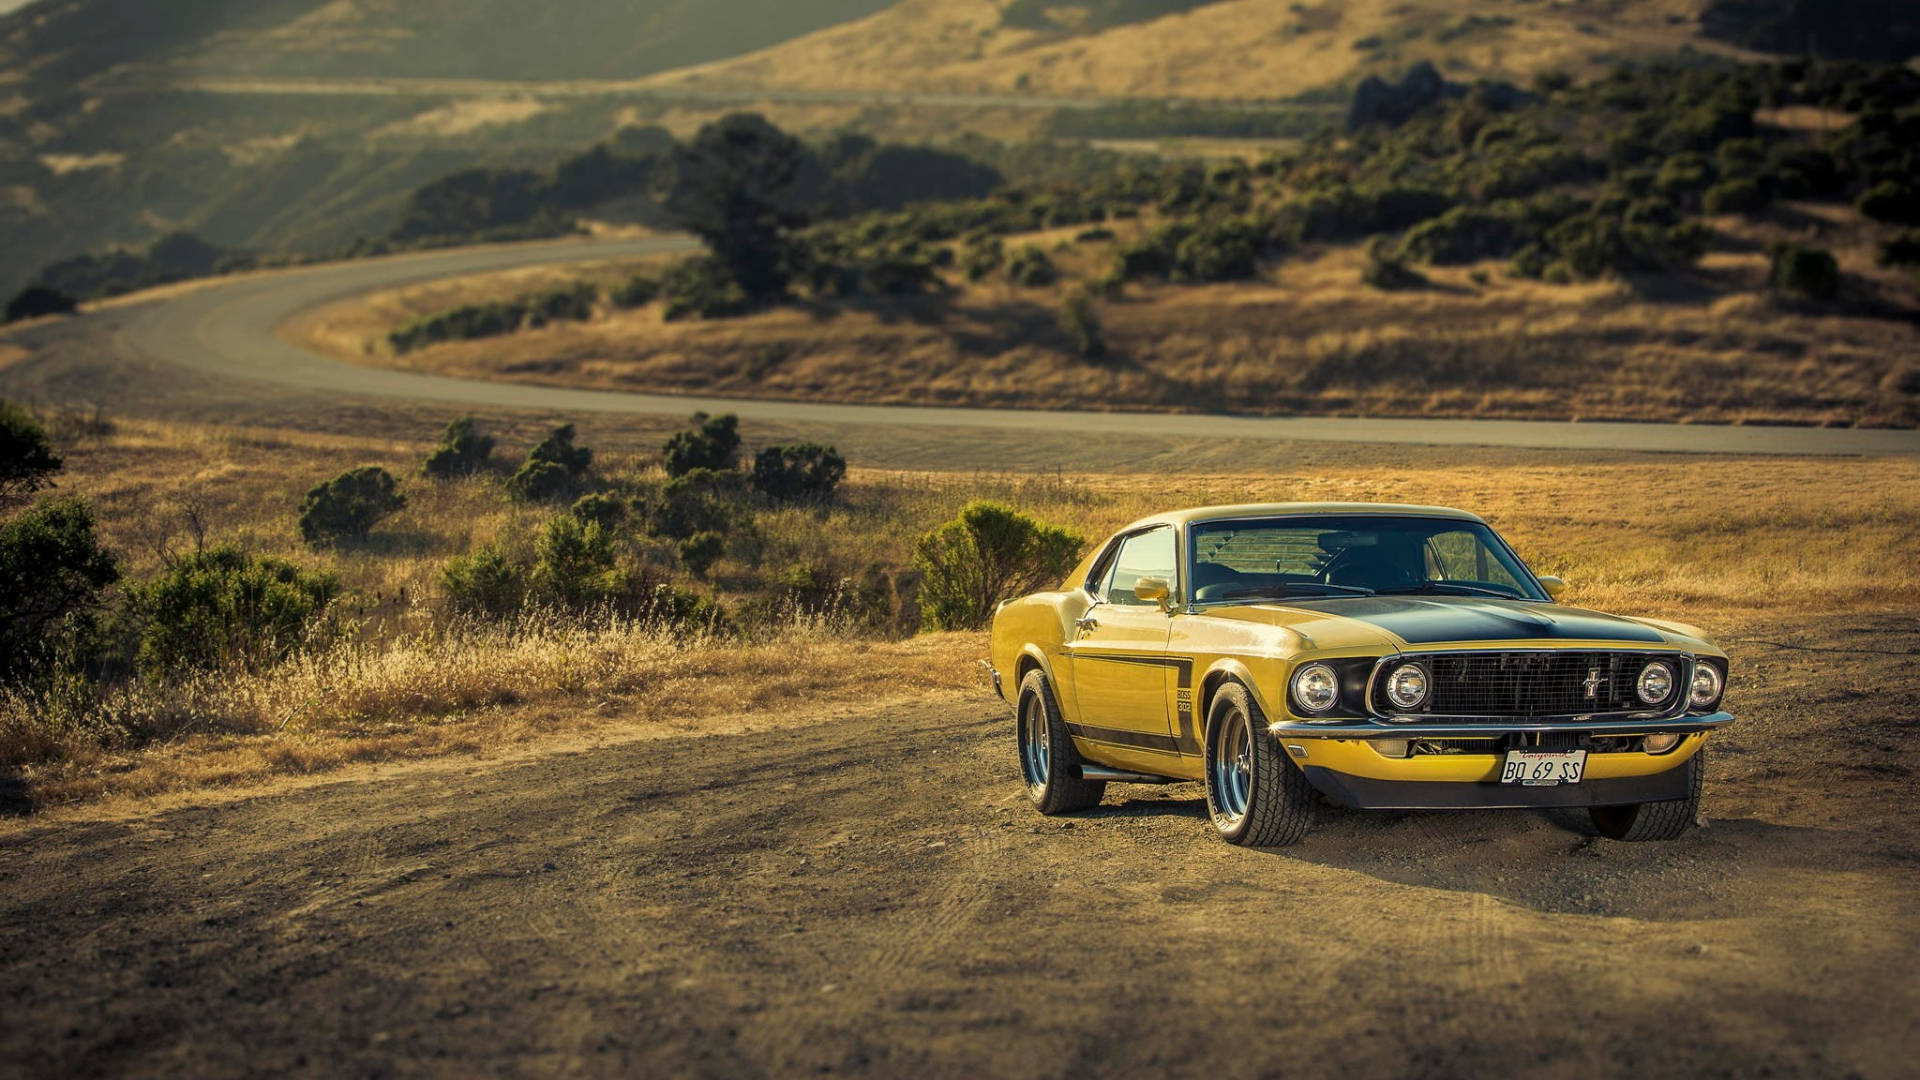 Yellow Ford Mustang Hd In The Mountains Wallpaper